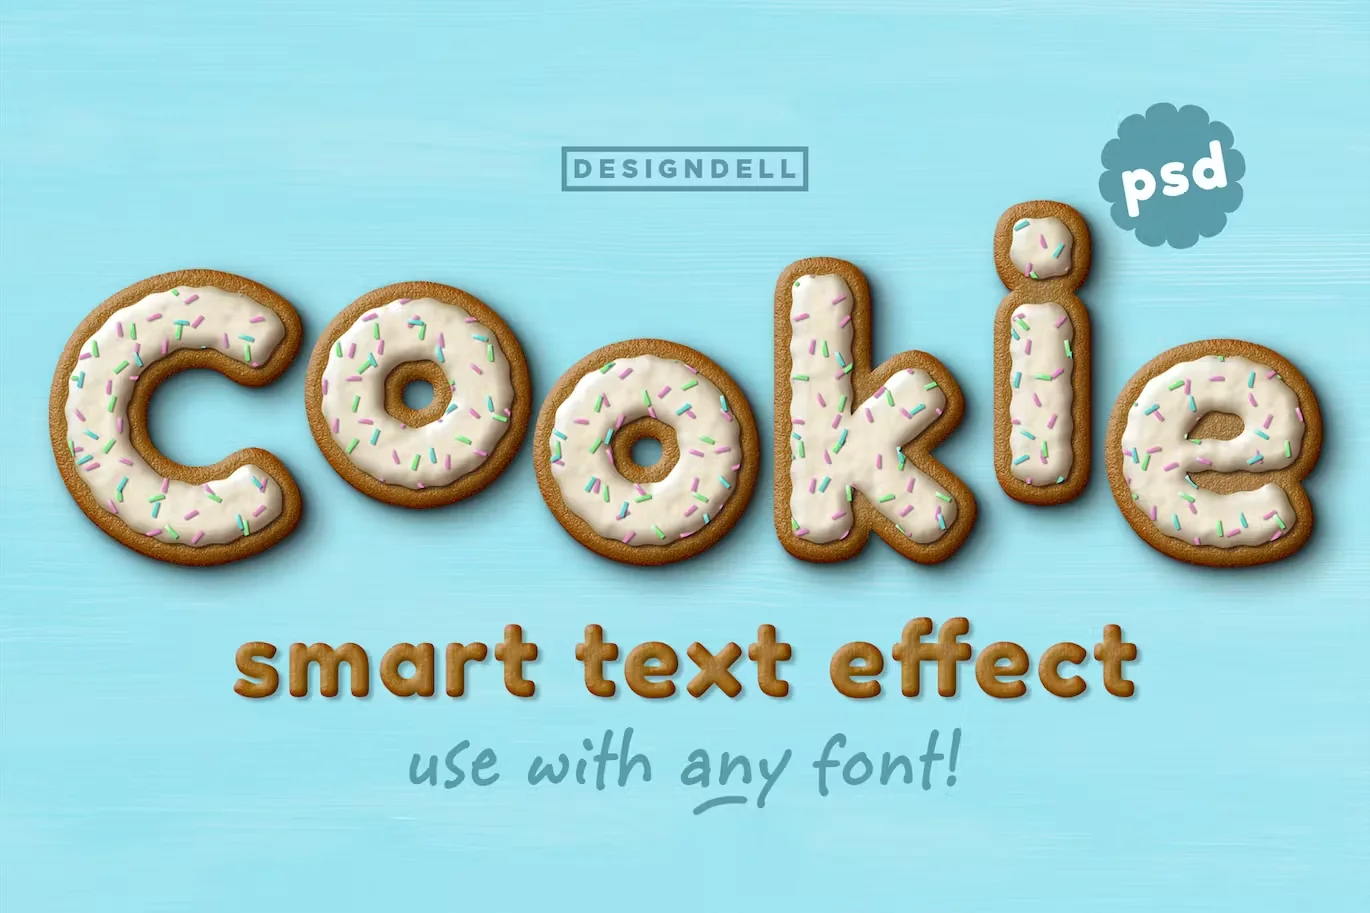 Cookie PSD Text Effect